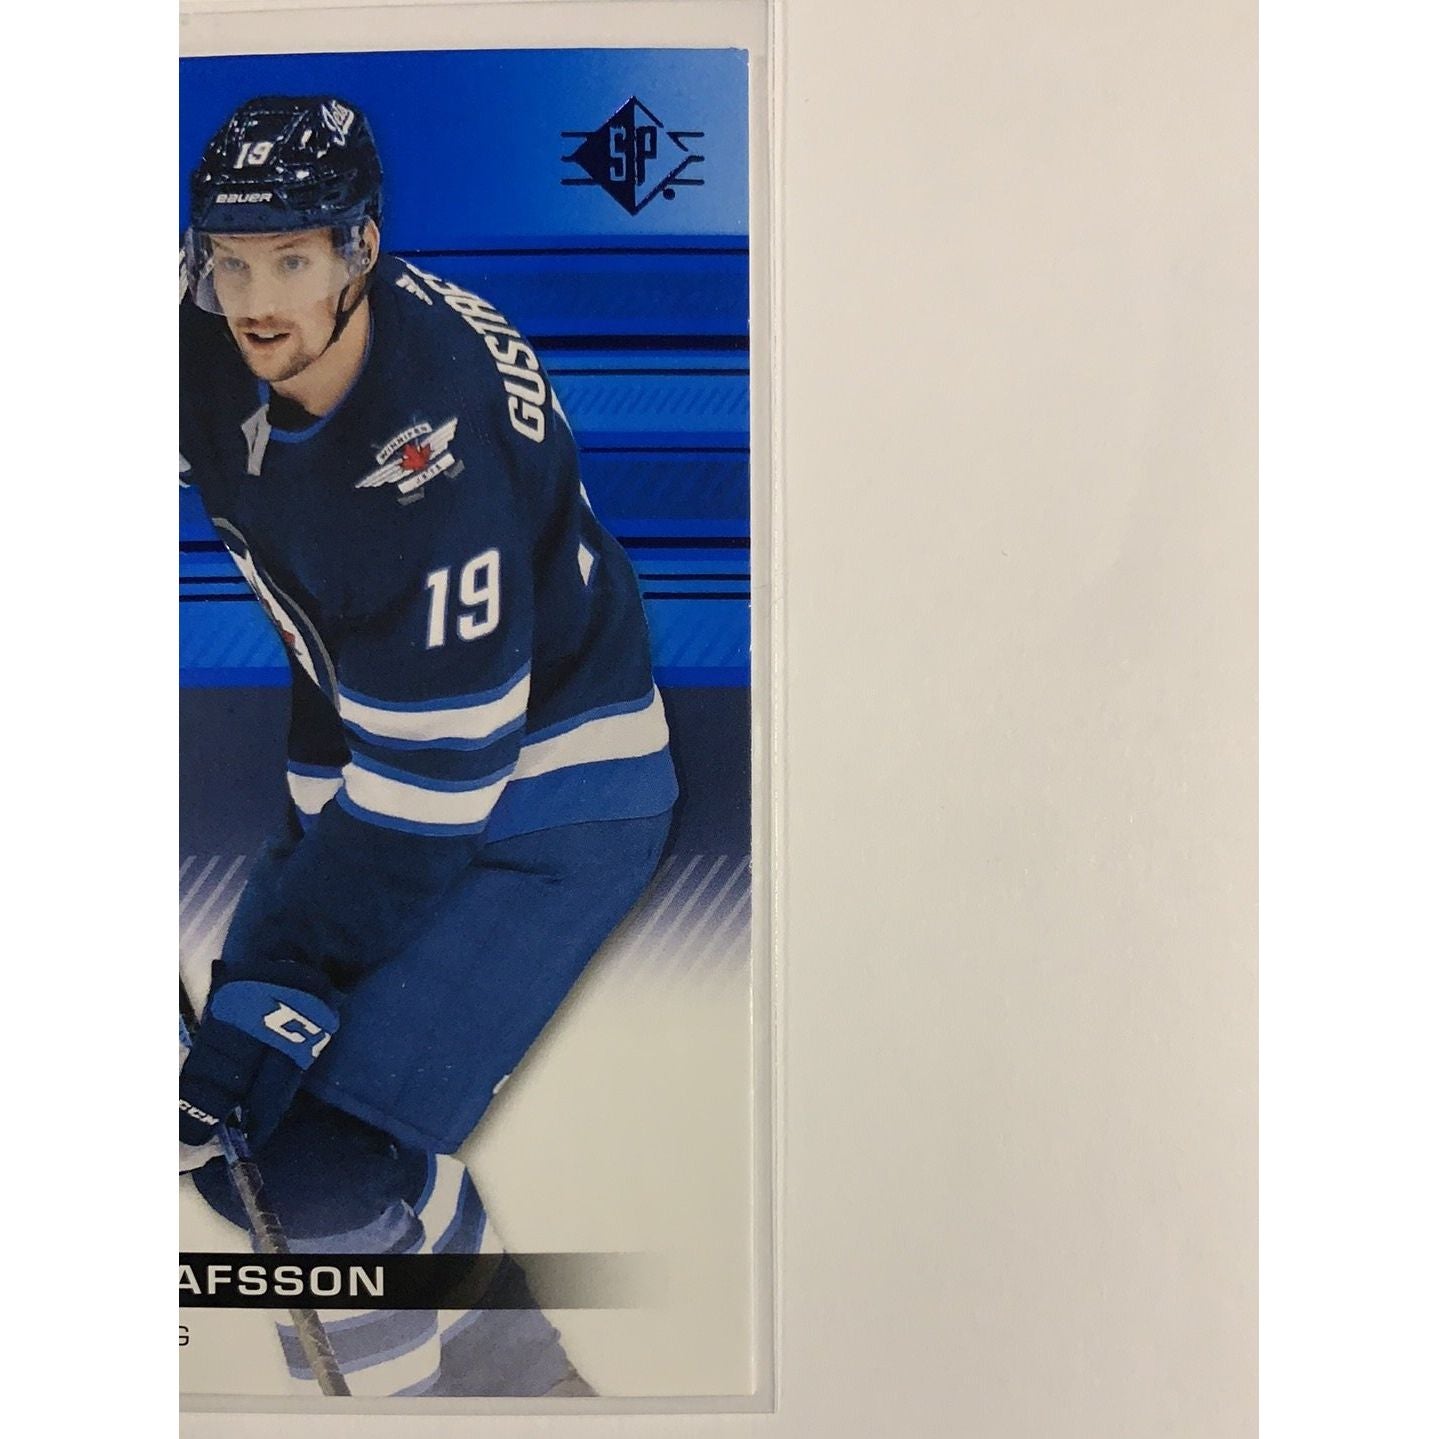  2019-20 SP David Gustafsson Rookie Authentics  Local Legends Cards & Collectibles